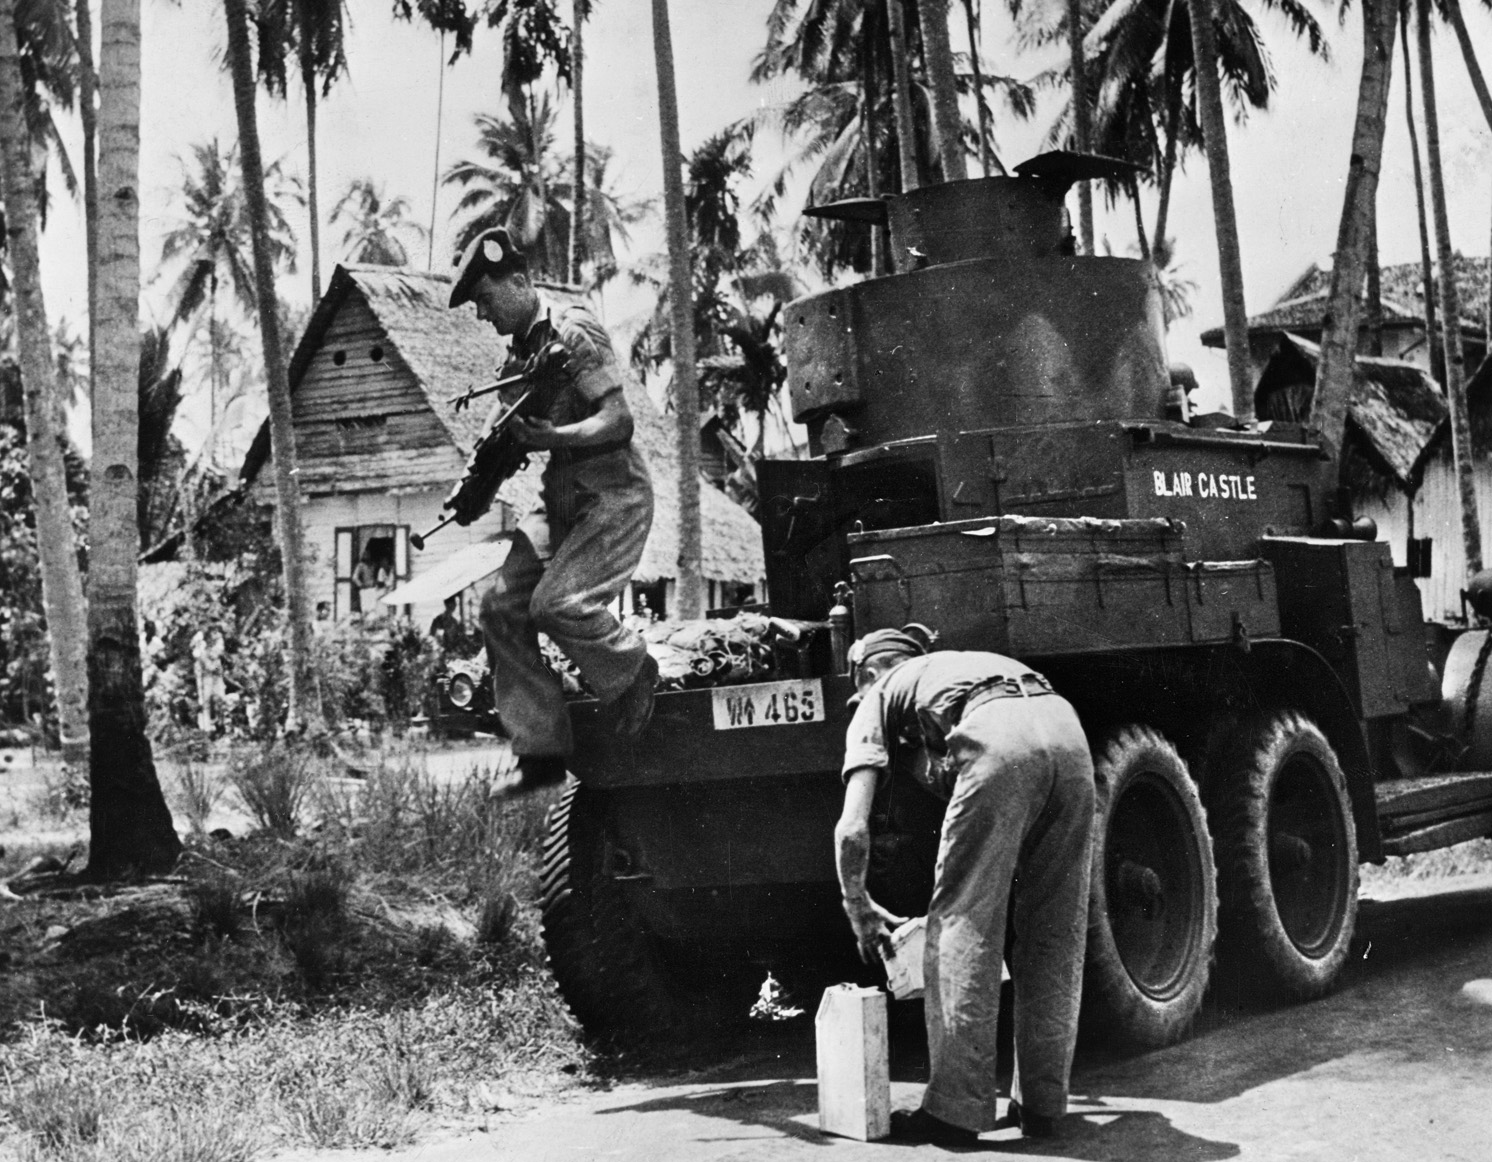 British forces were without armored support during their defense of the Malay Peninsula. Only a few obsolete armored cars were available, and they were of little use against the Japanese tanks. In this photo, soldiers of the Argyll and Sutherland Highlander Regiment patrol in company with a Lanchester armored car.